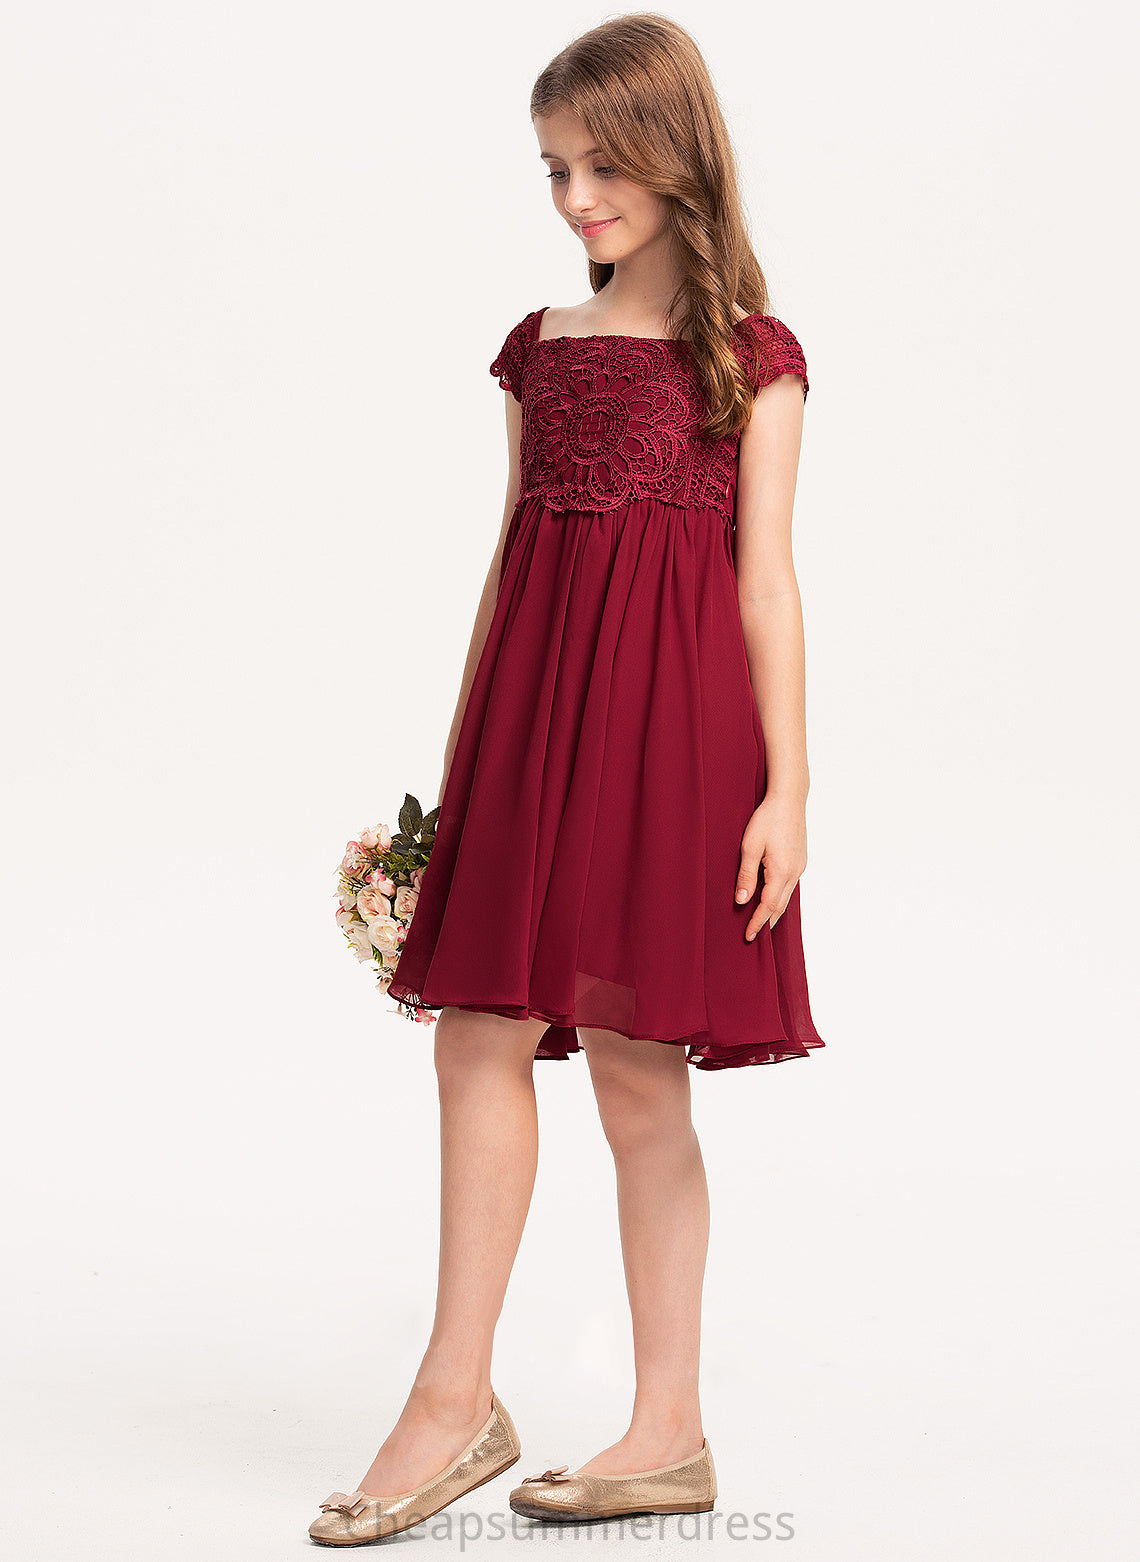 Bow(s) Courtney Knee-Length Chiffon Junior Bridesmaid Dresses Lace Off-the-Shoulder A-Line With